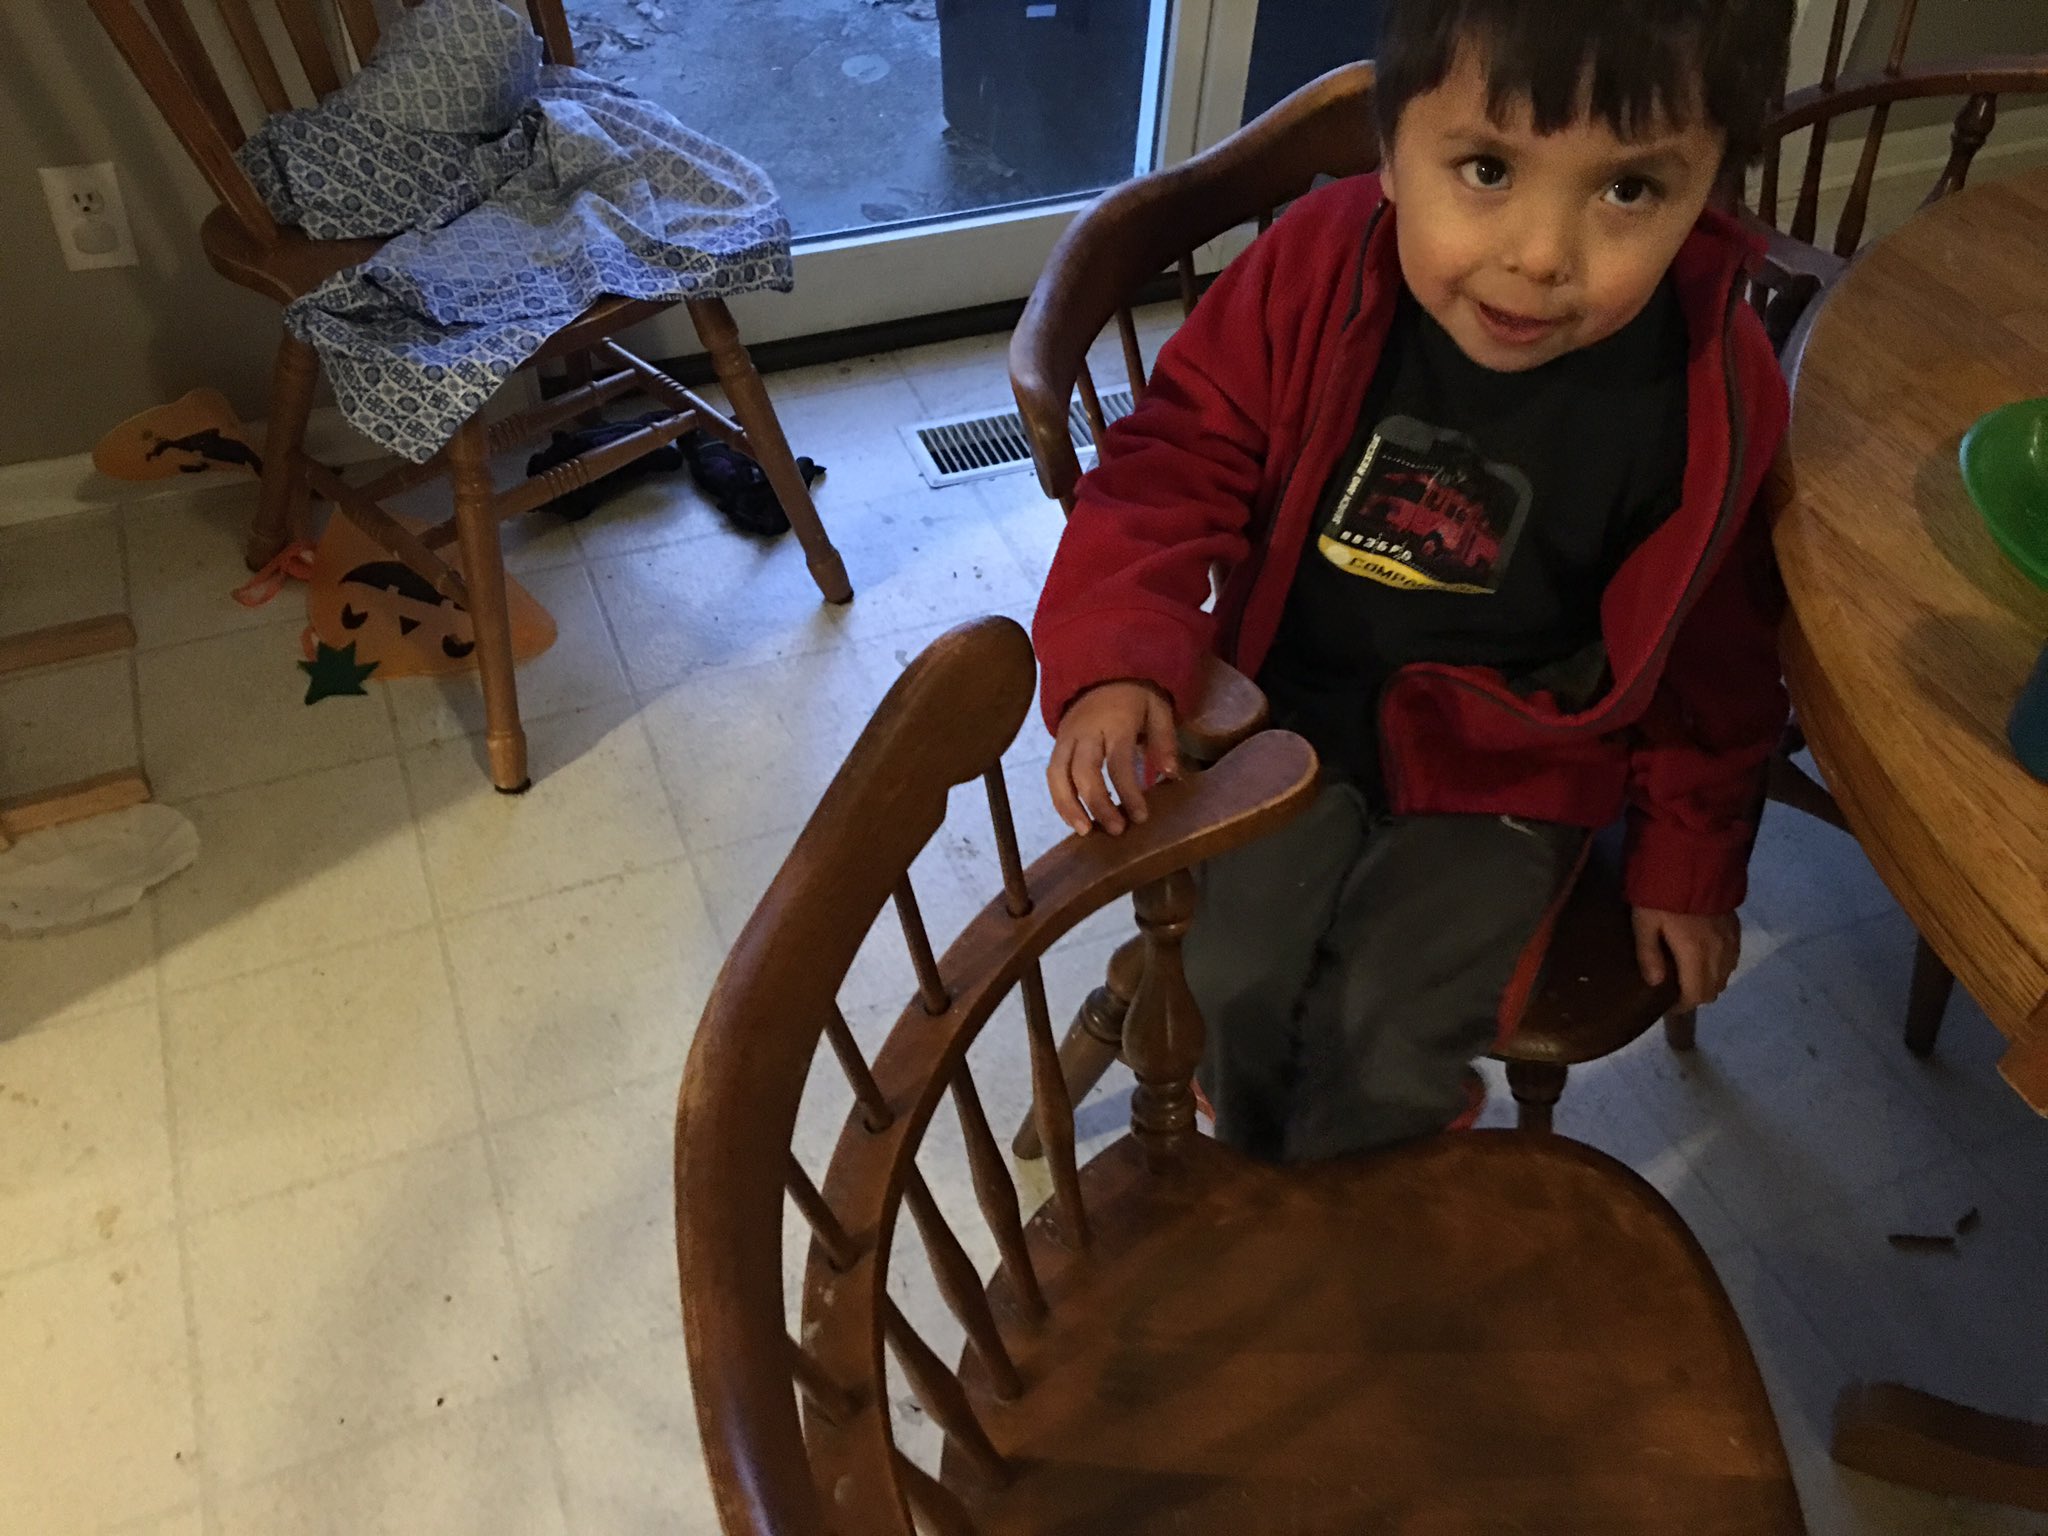 Four year old has his legs "trapped" between two wooden dining room chairs.